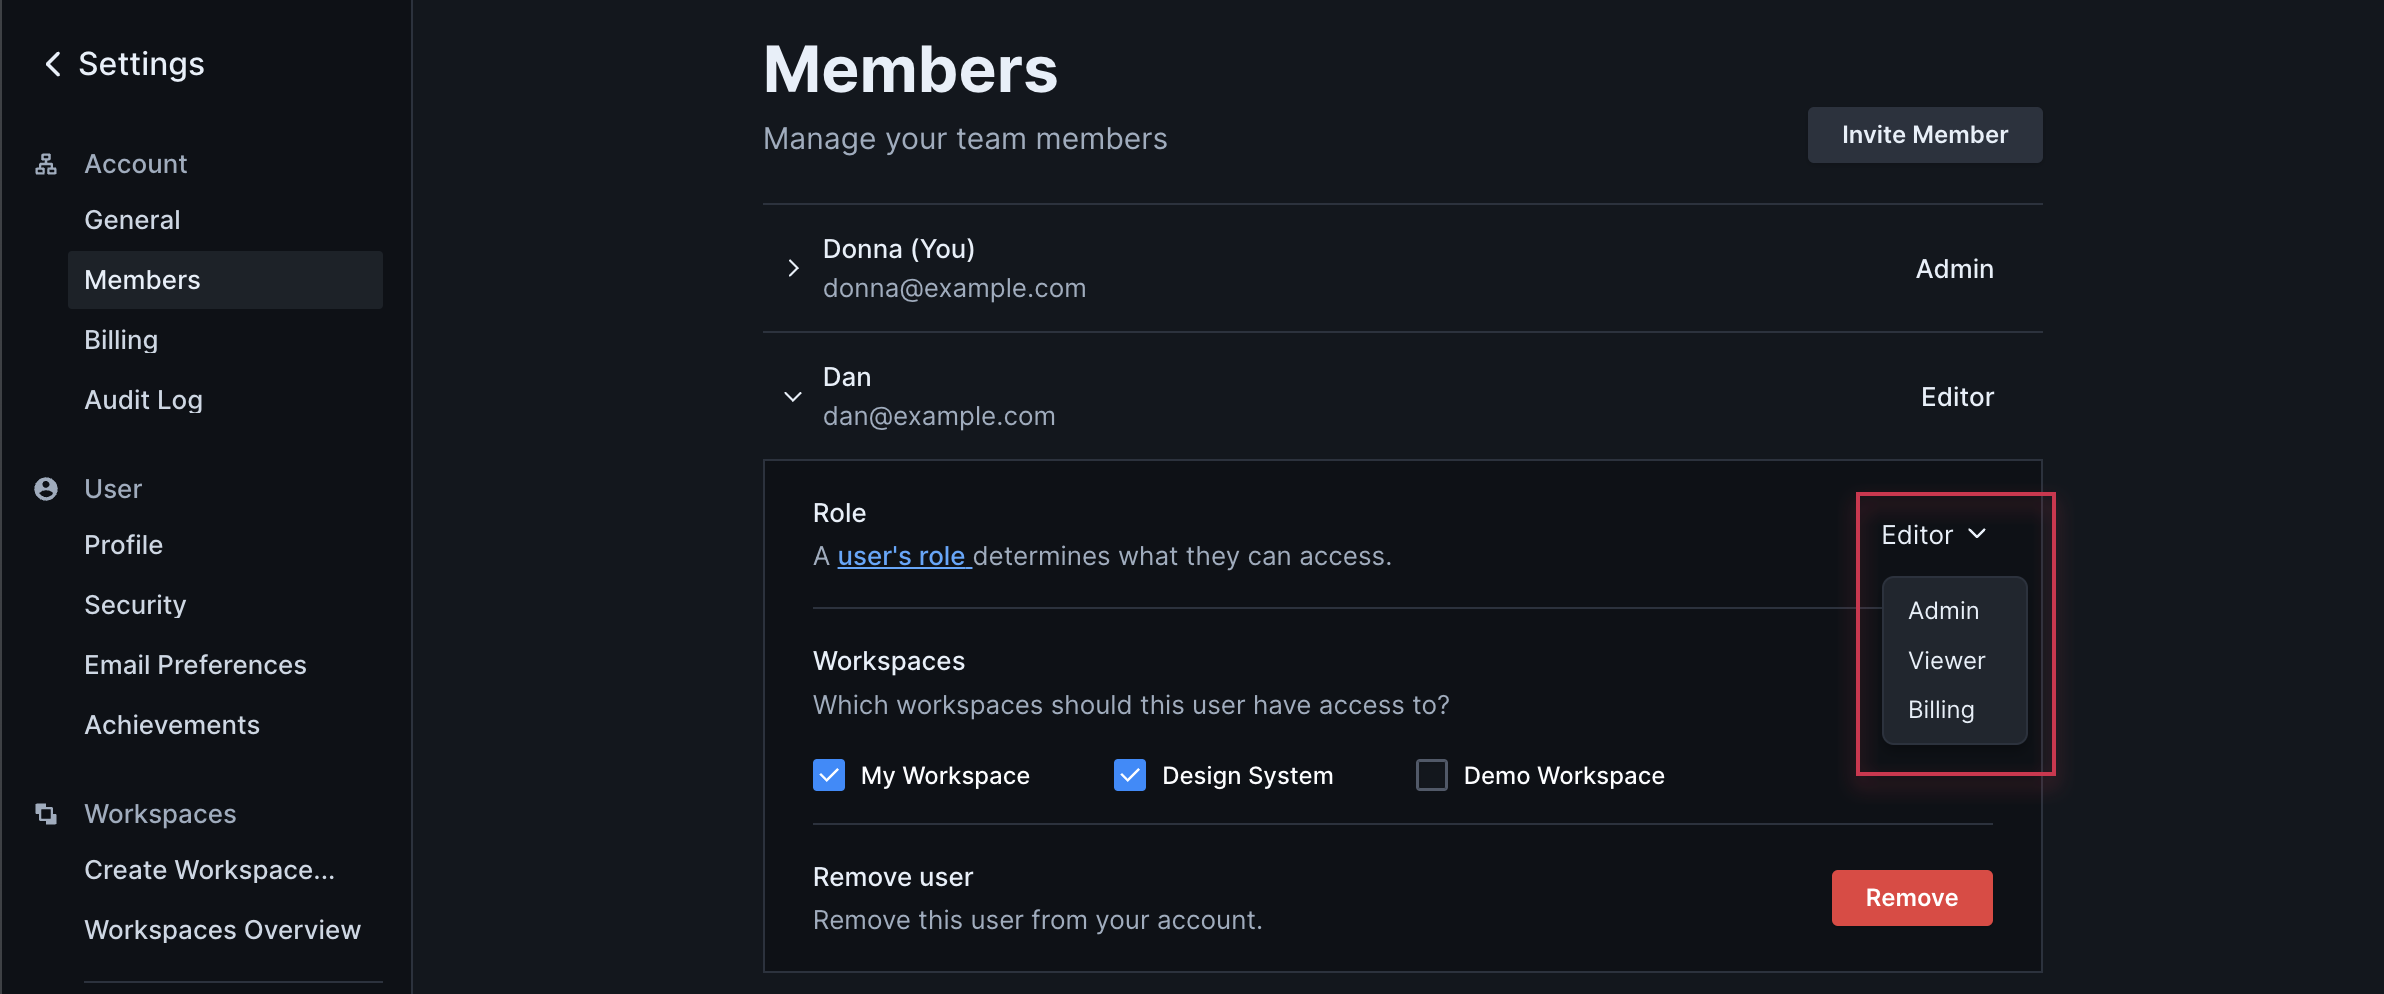 Image of the Members settings page, which lists the name and email address of the current members on the team. To the right of each user is a drop down menu that shows their current role. The role menu for one user is open, revealing options for "Admin", "Billing", and "Viewer".